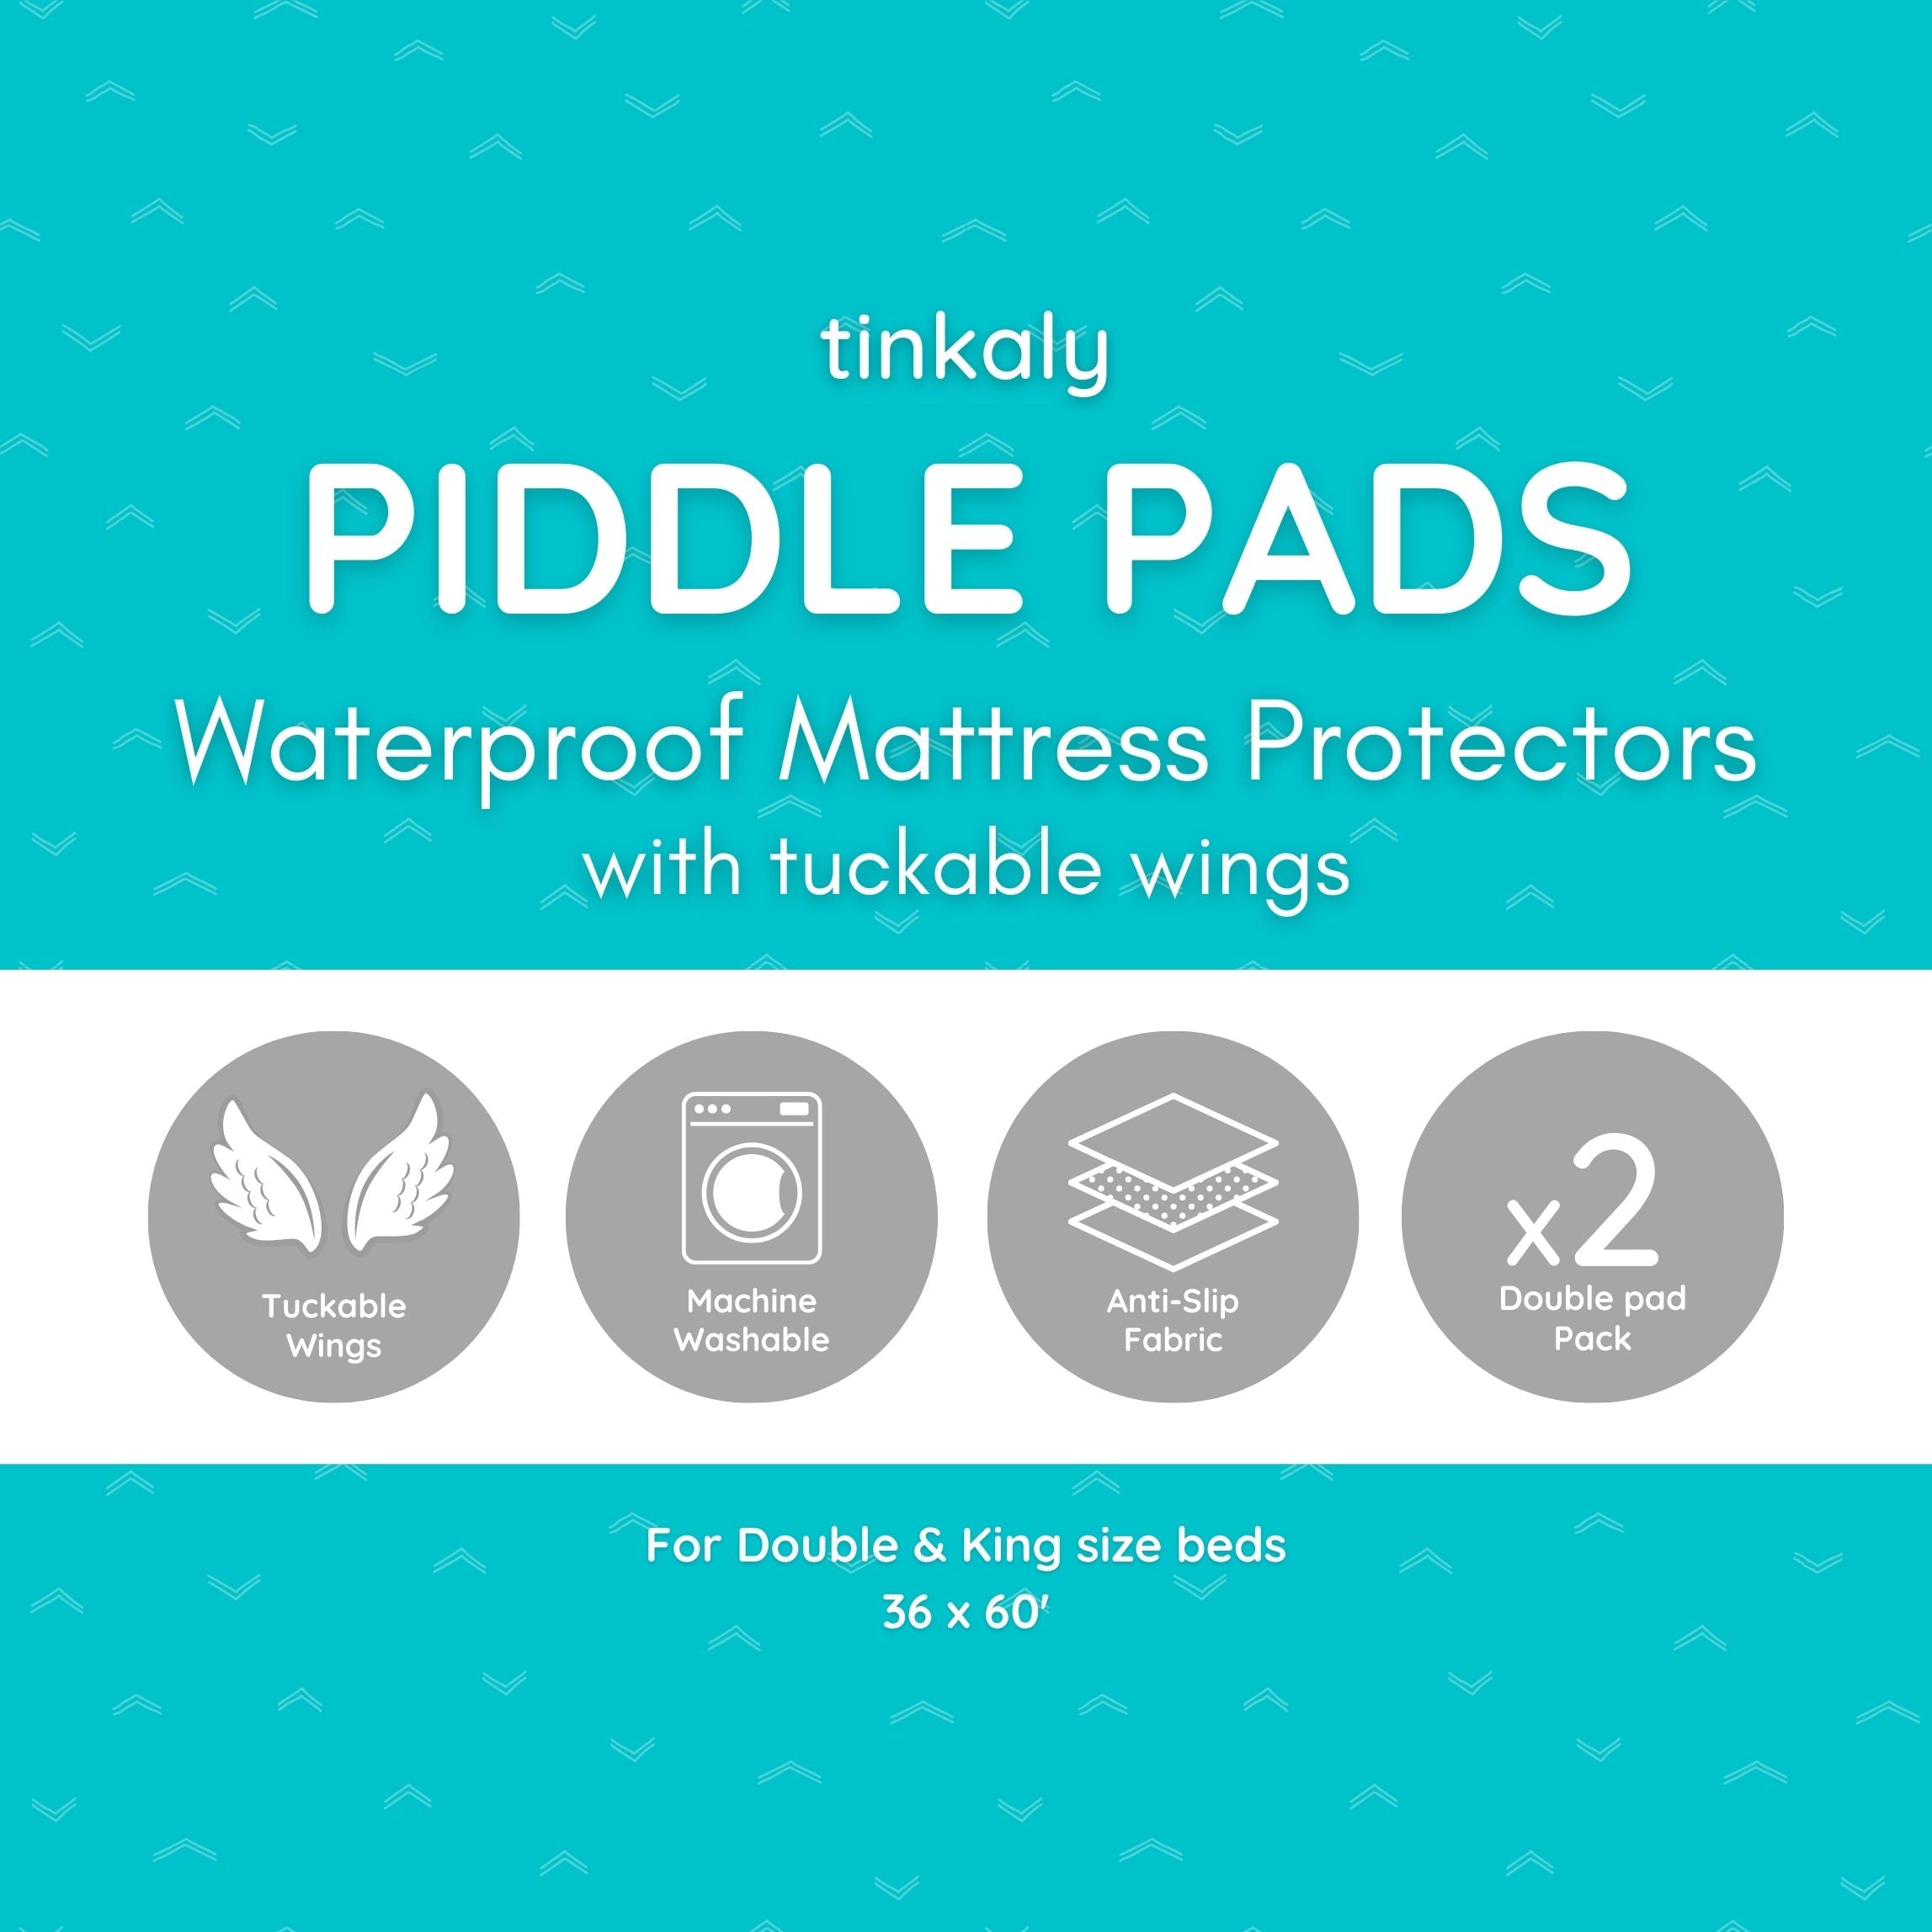 Piddle Pads - Waterproof bedwetting & potty training bed protectors (Pack of 2)